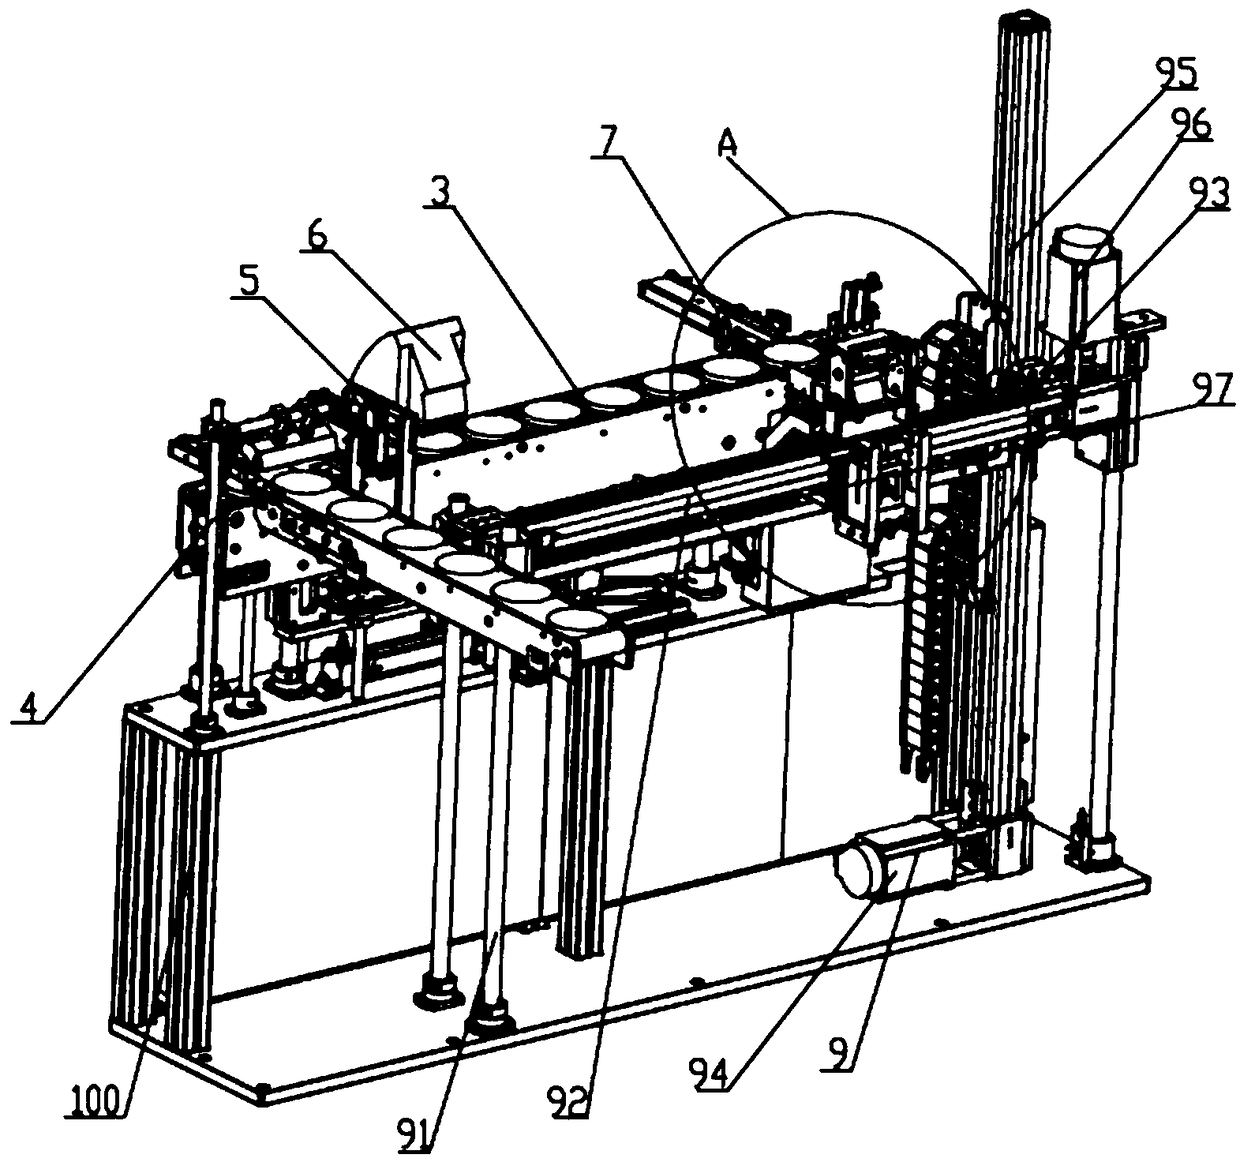 Full-automatic lens sorting and packaging machine